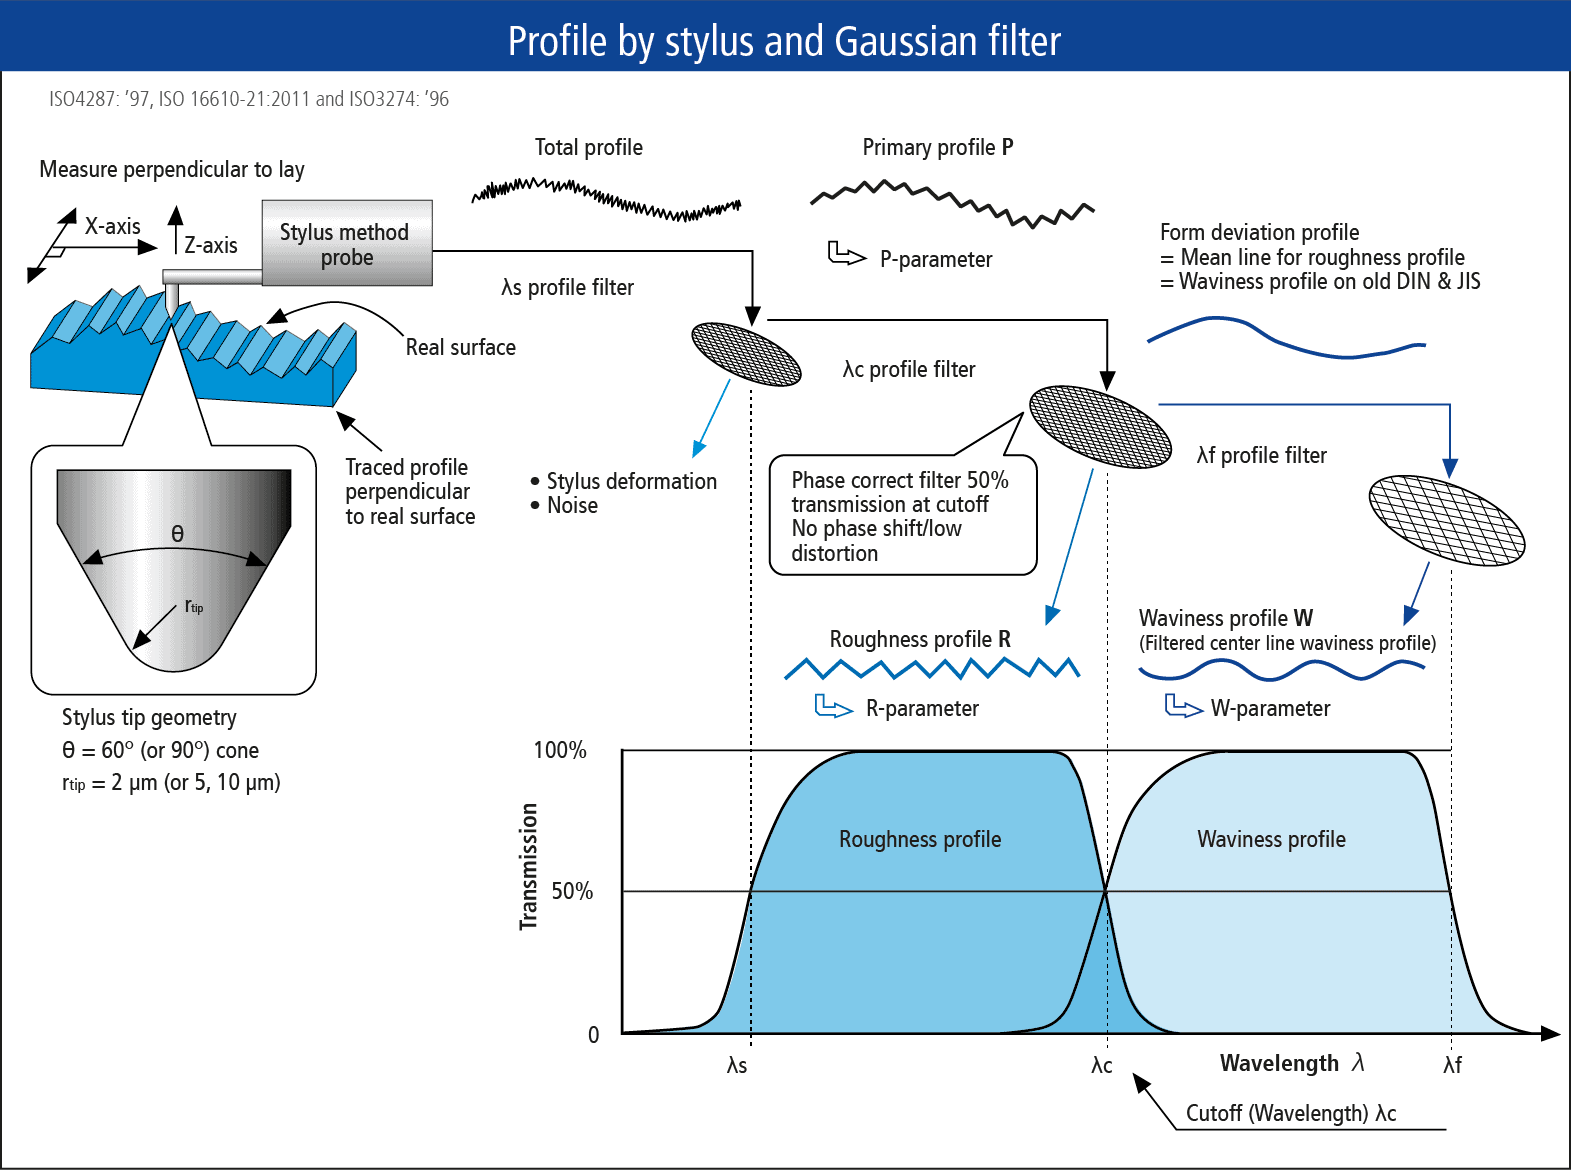 Technical drawing: surface profile by stylus and gaussian filter